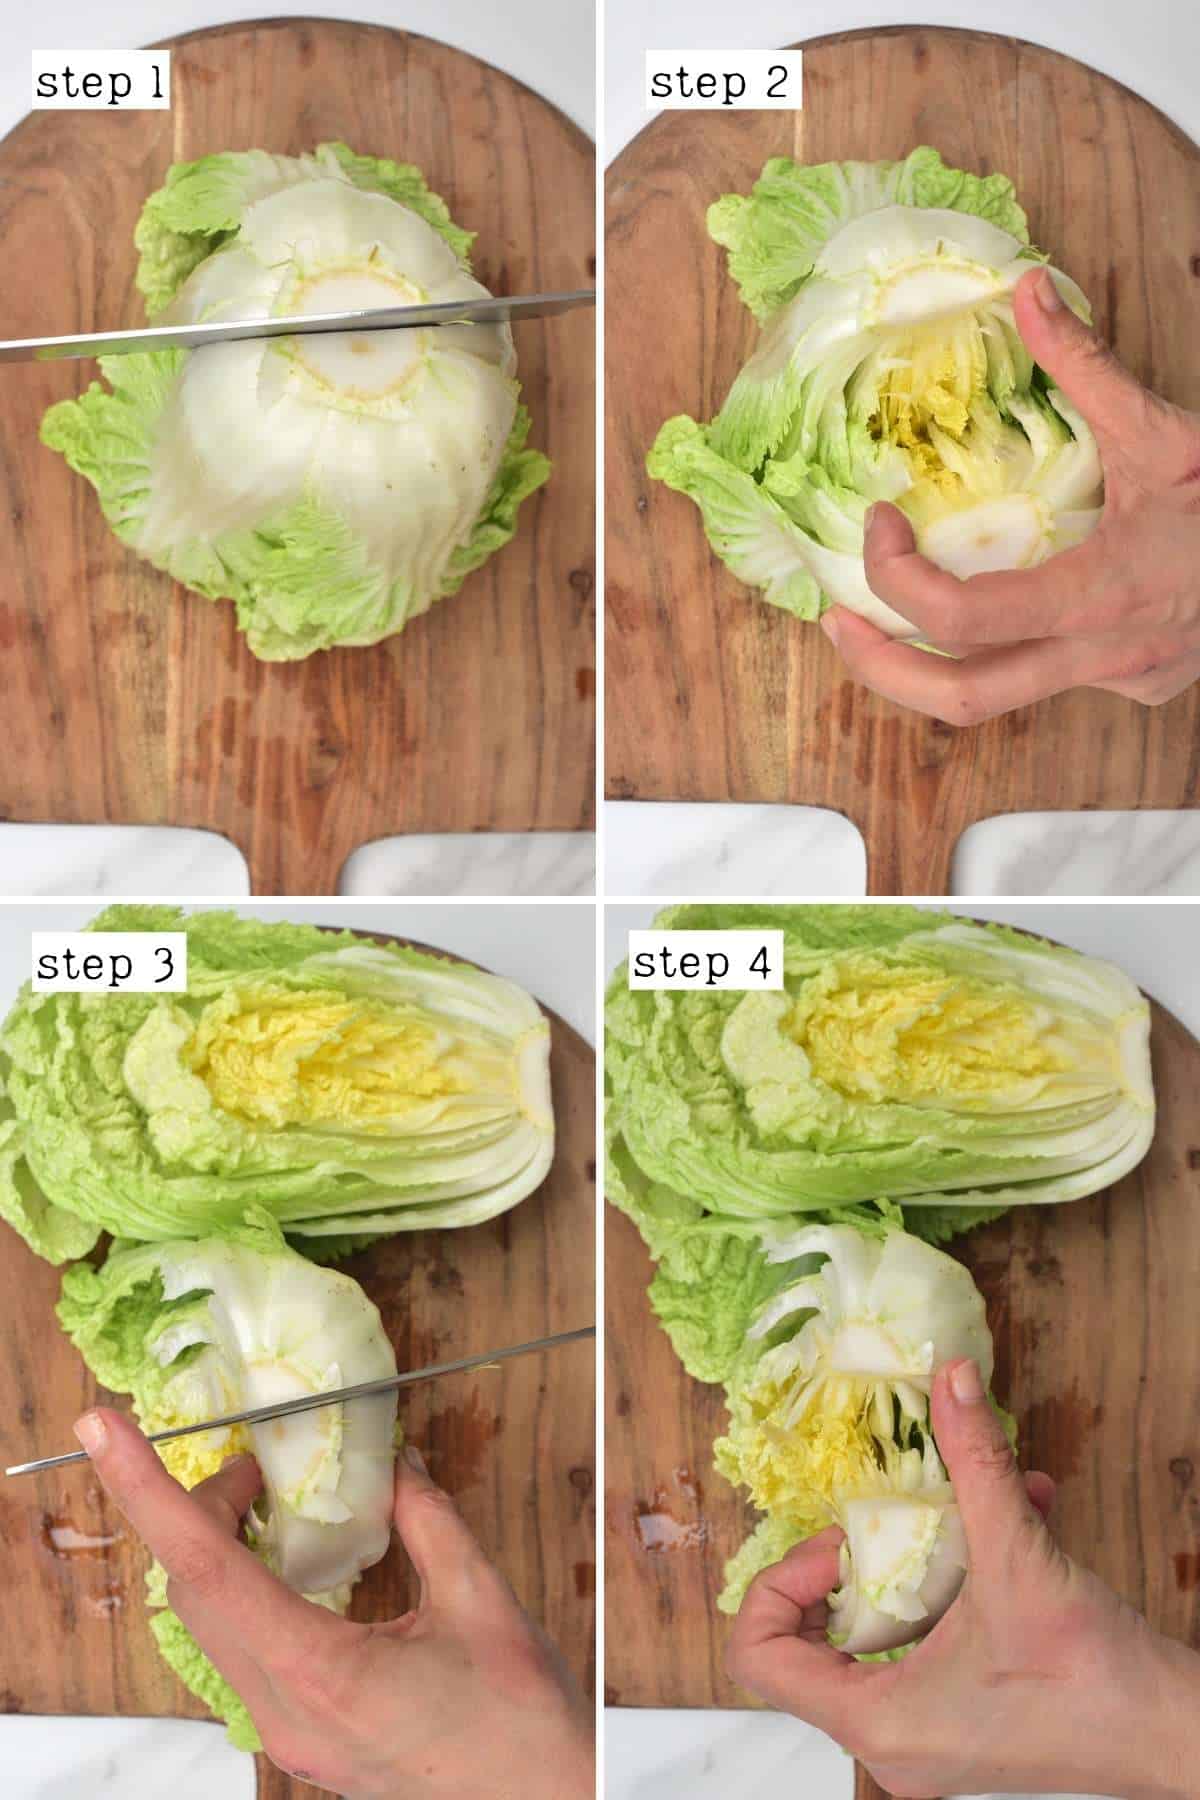 Steps for cutting napa cabbage